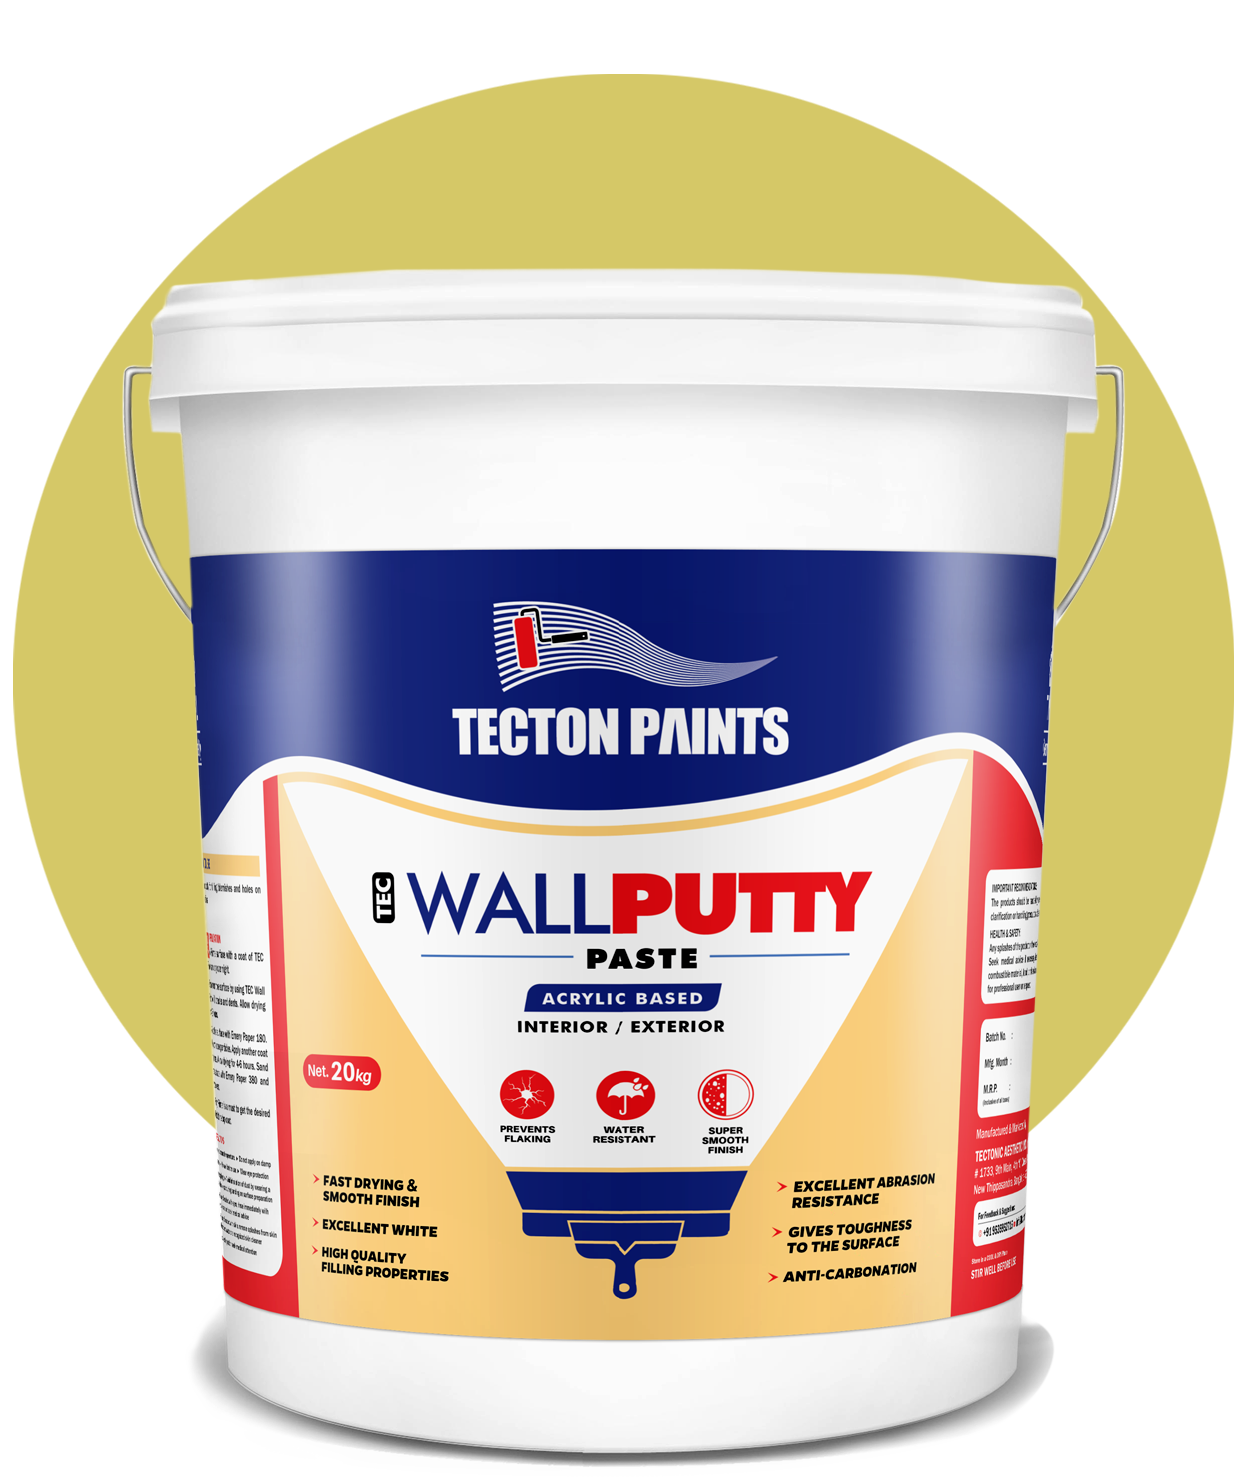 wall putty paste